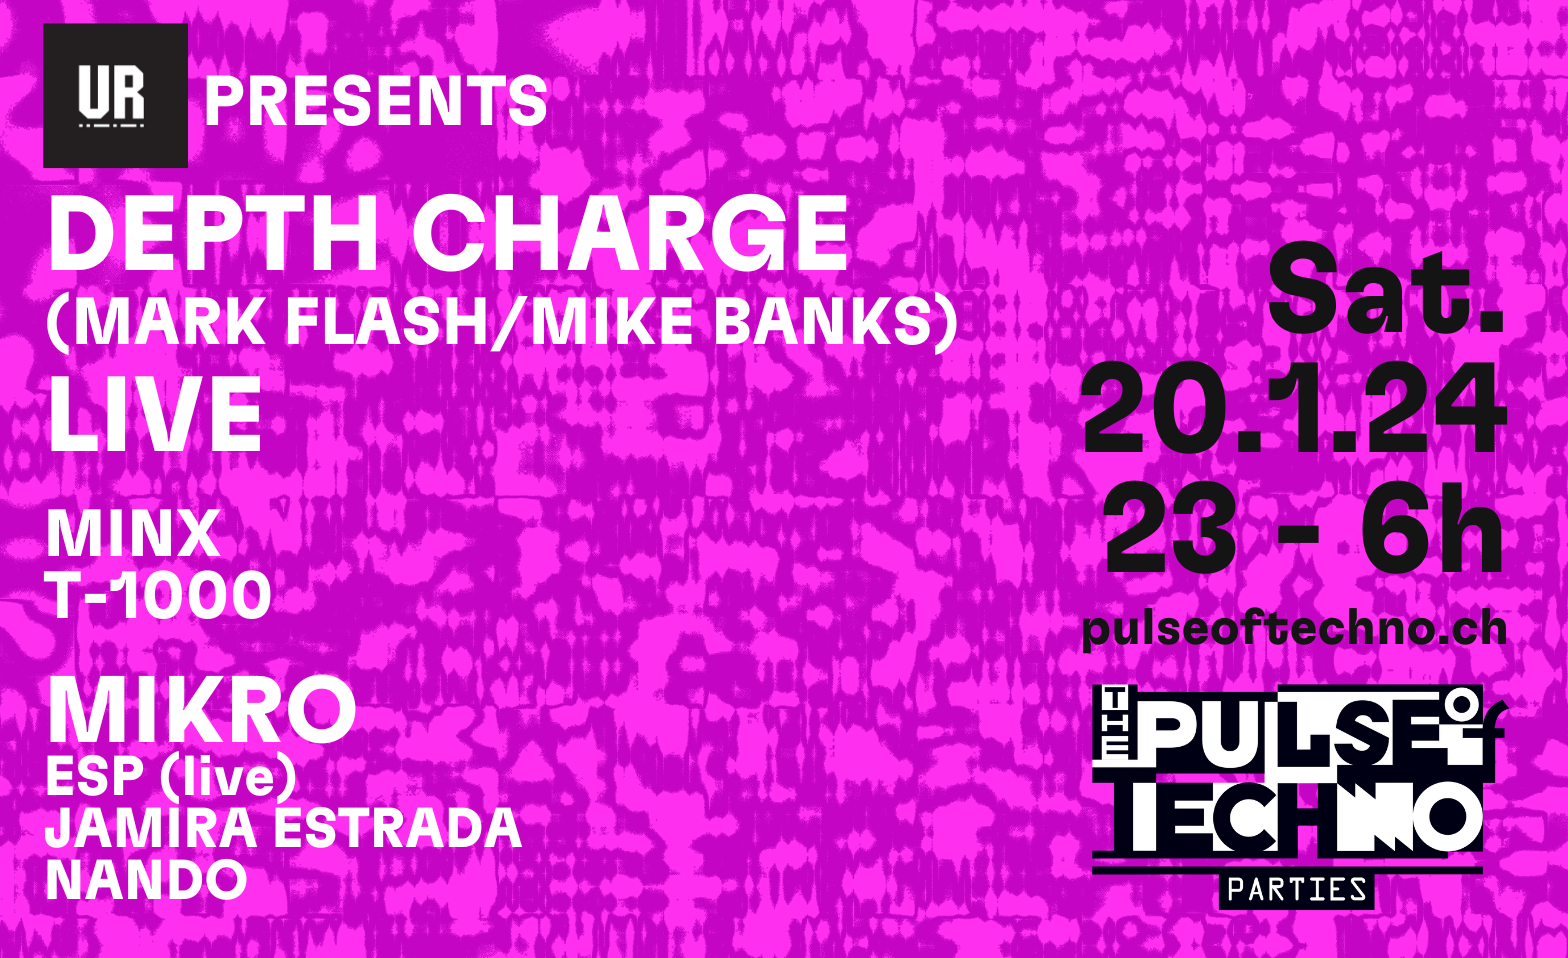 Underground Resistance presents DEPTH CHARGE (Mark Flash/Mike Banks) LIVE, Minx, T-1000 & Mikro - フライヤー表